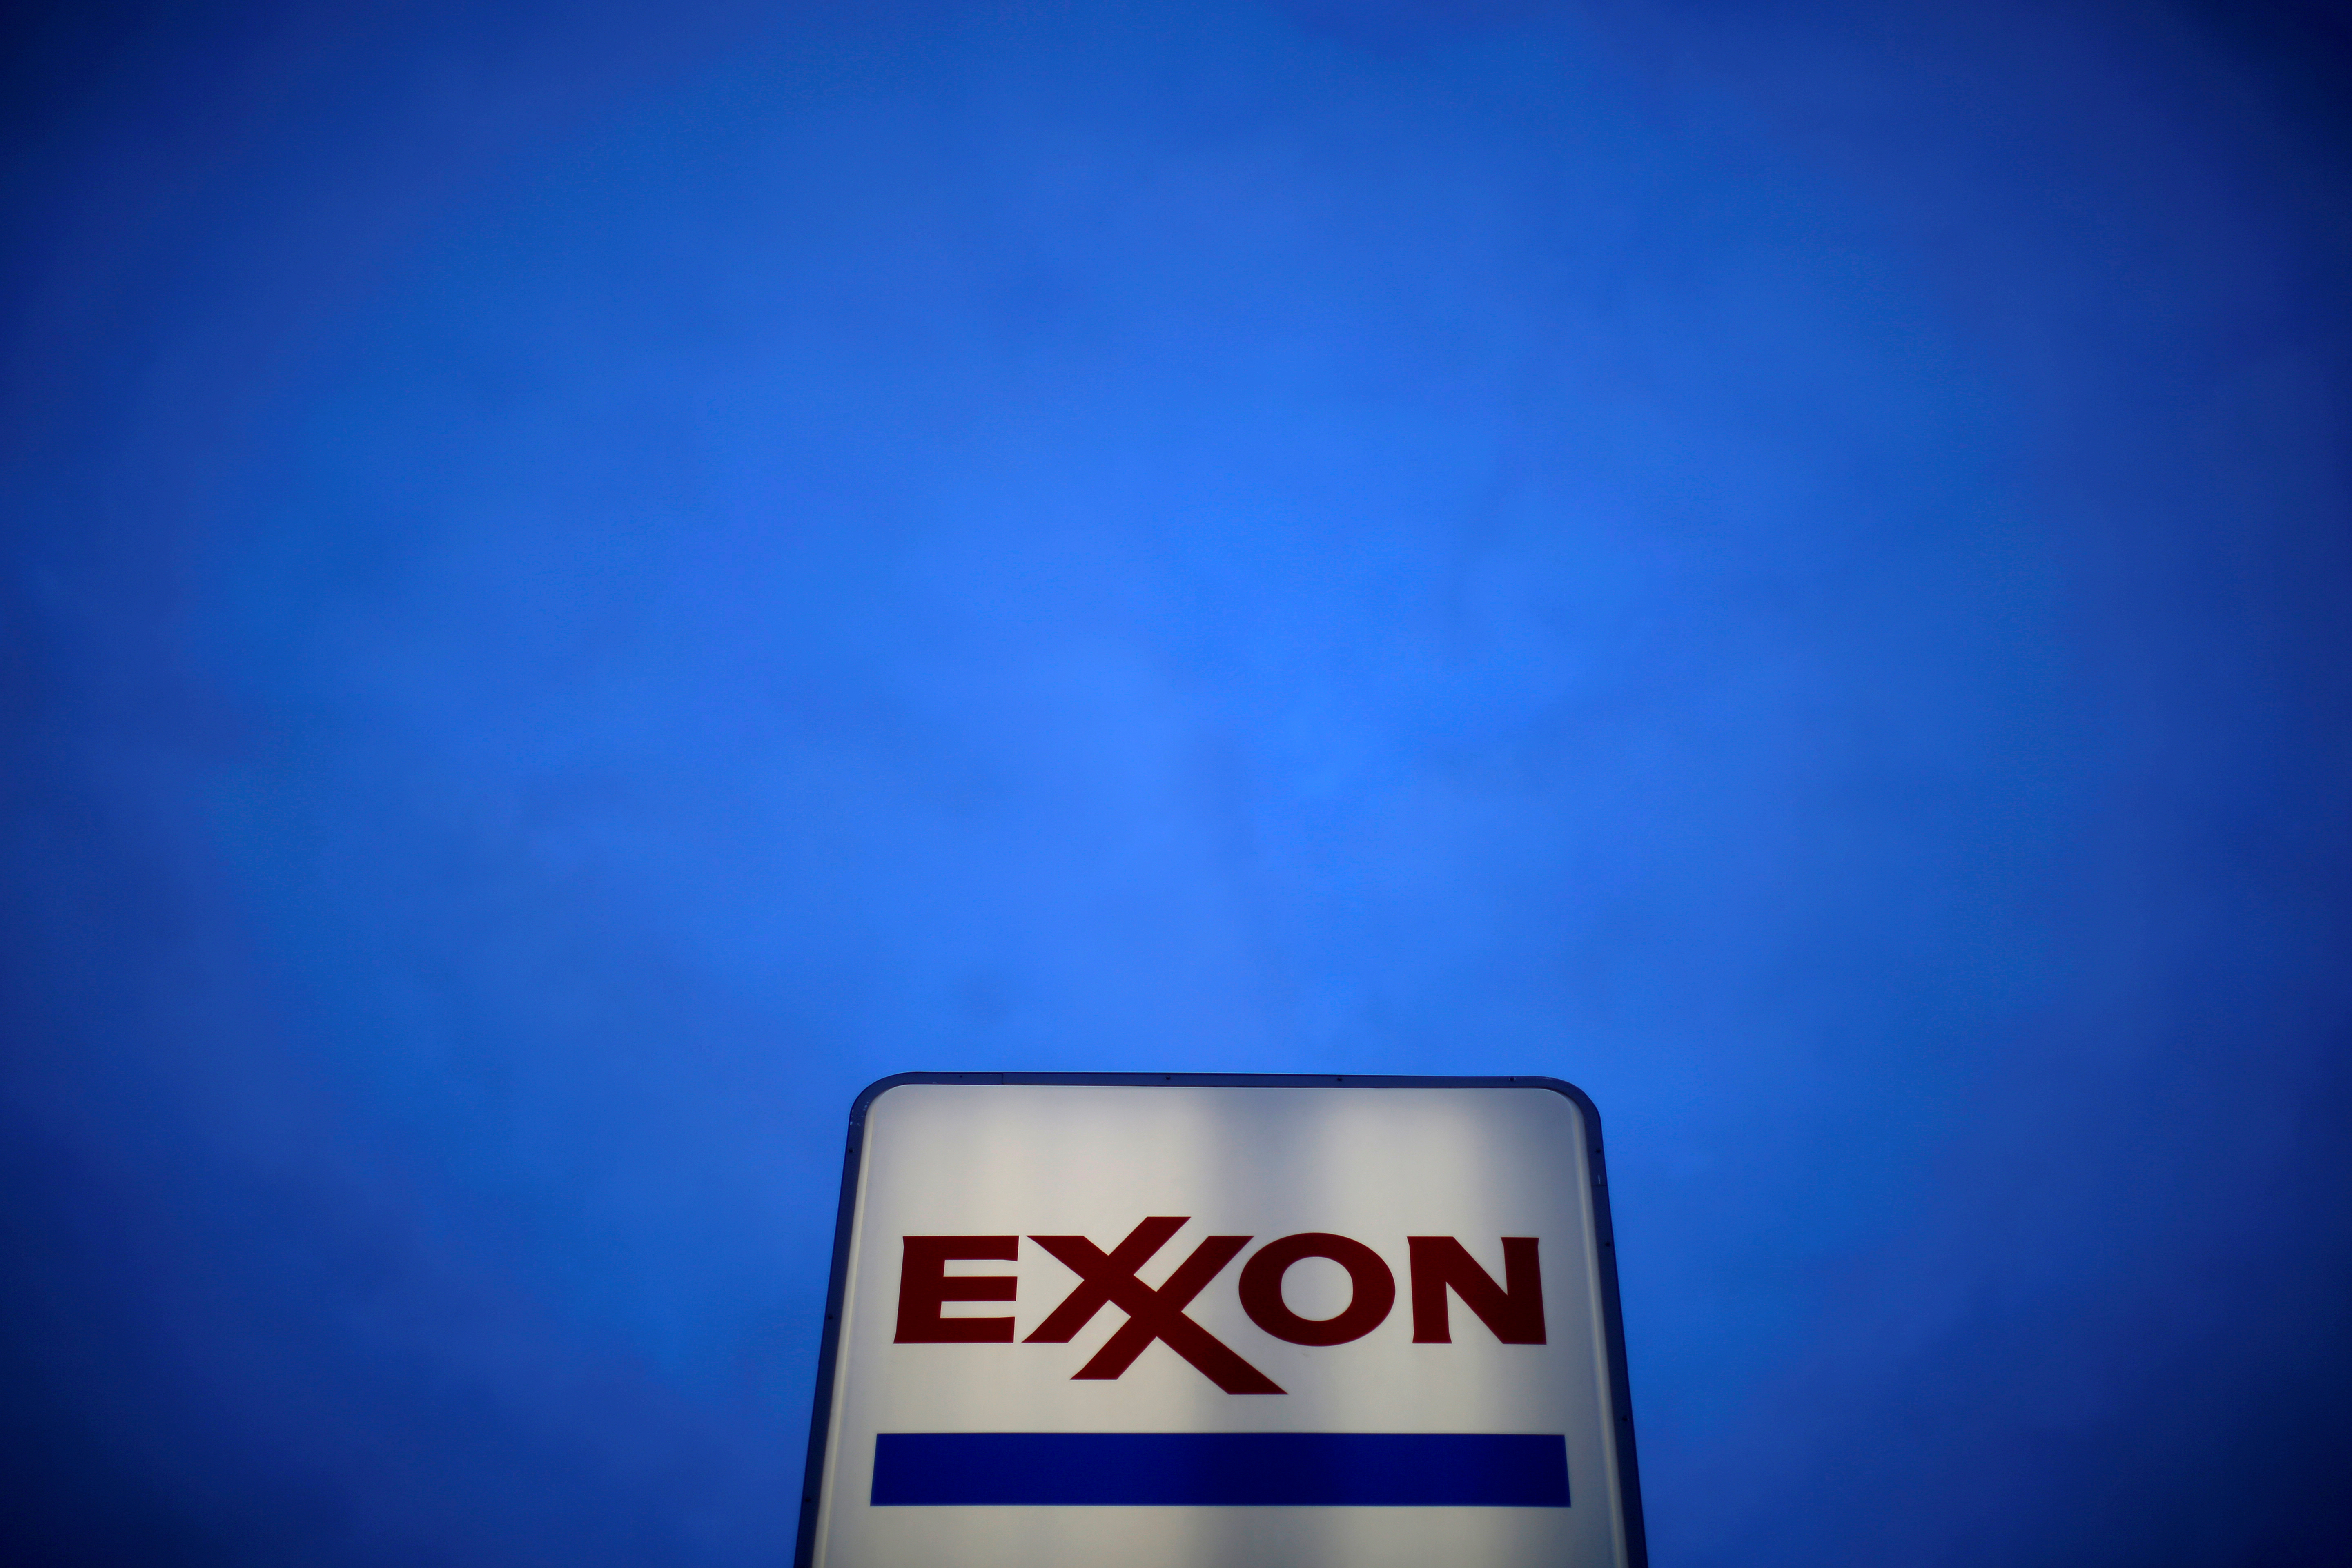 An Exxon sign is seen at a gas station in the Chicago suburb of Norridge, Illinois, U.S., October 27, 2016. REUTERS/Jim Young